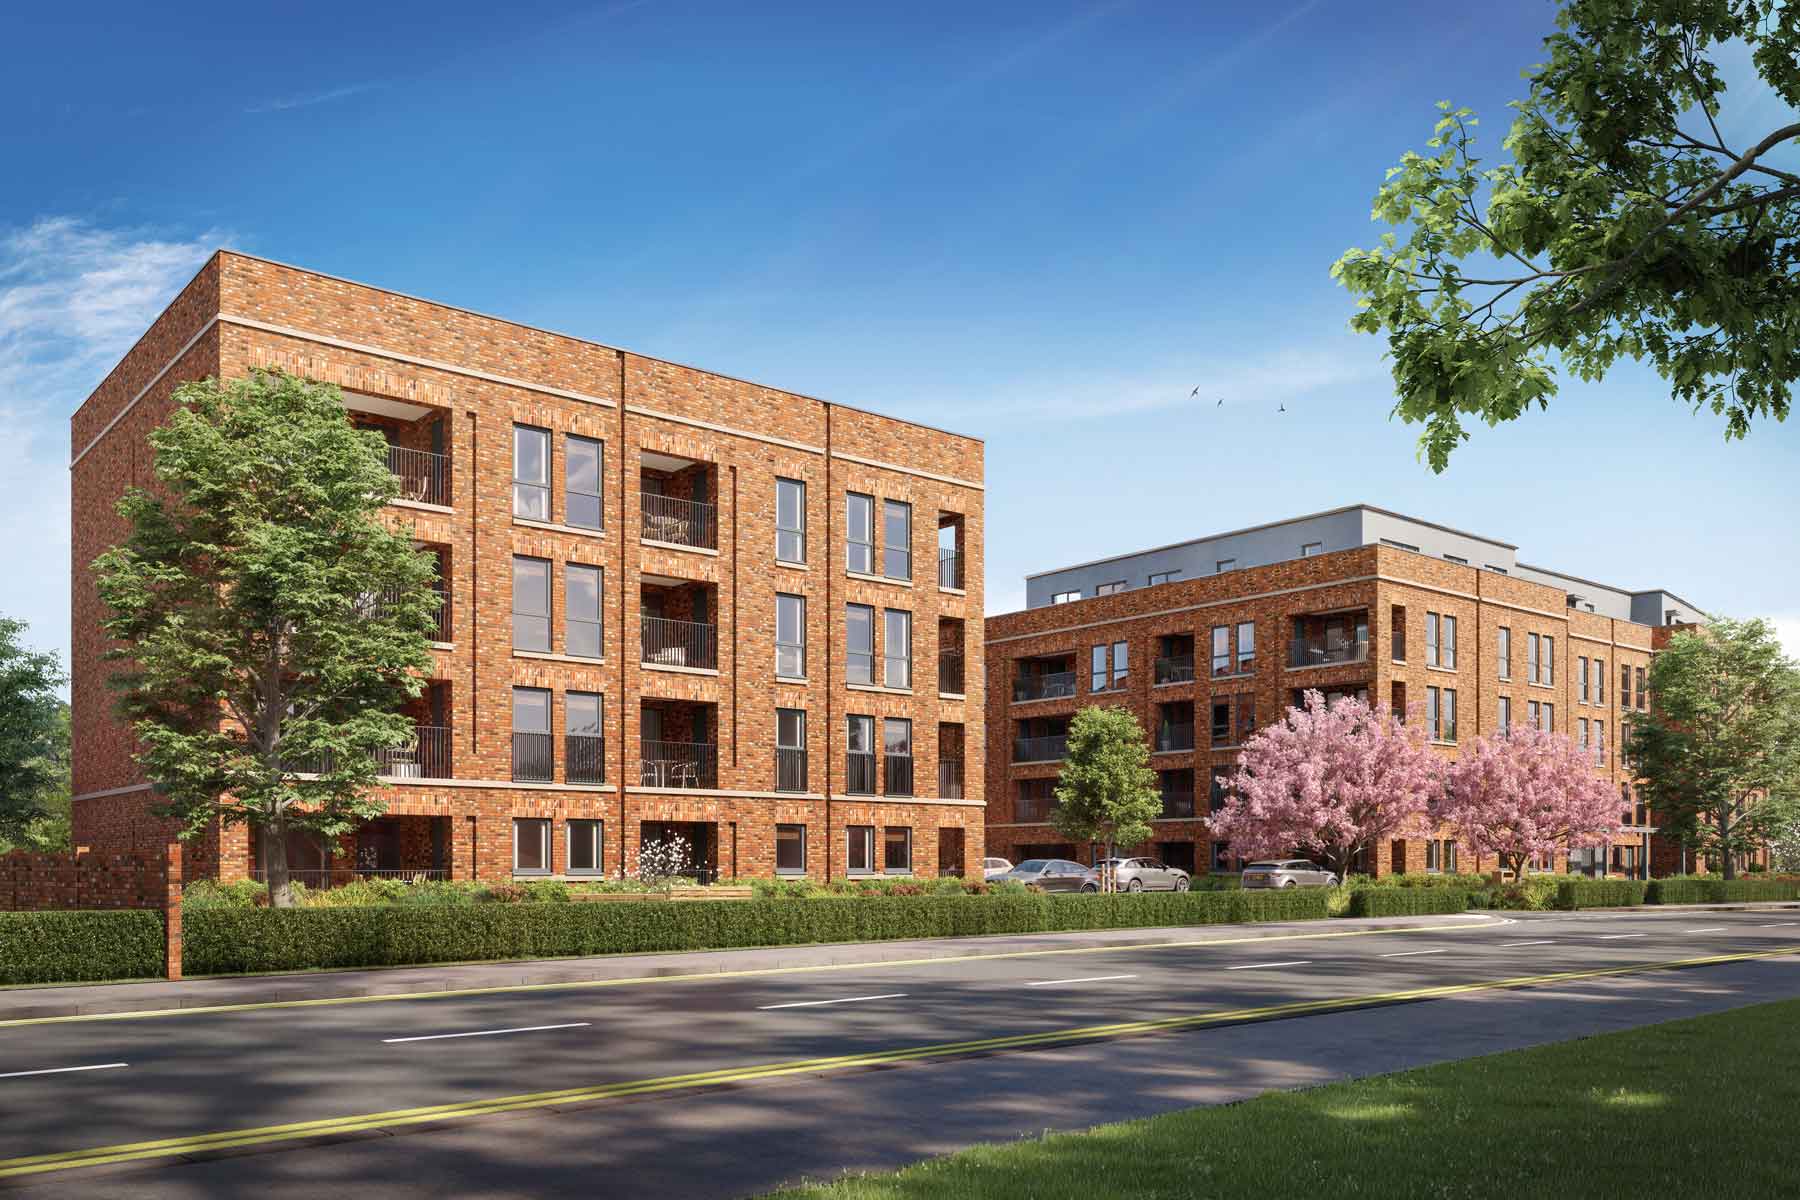 An exterior image of SO Resi's Whetstone development - available to purchase through Shared Ownership on Share to Buy!